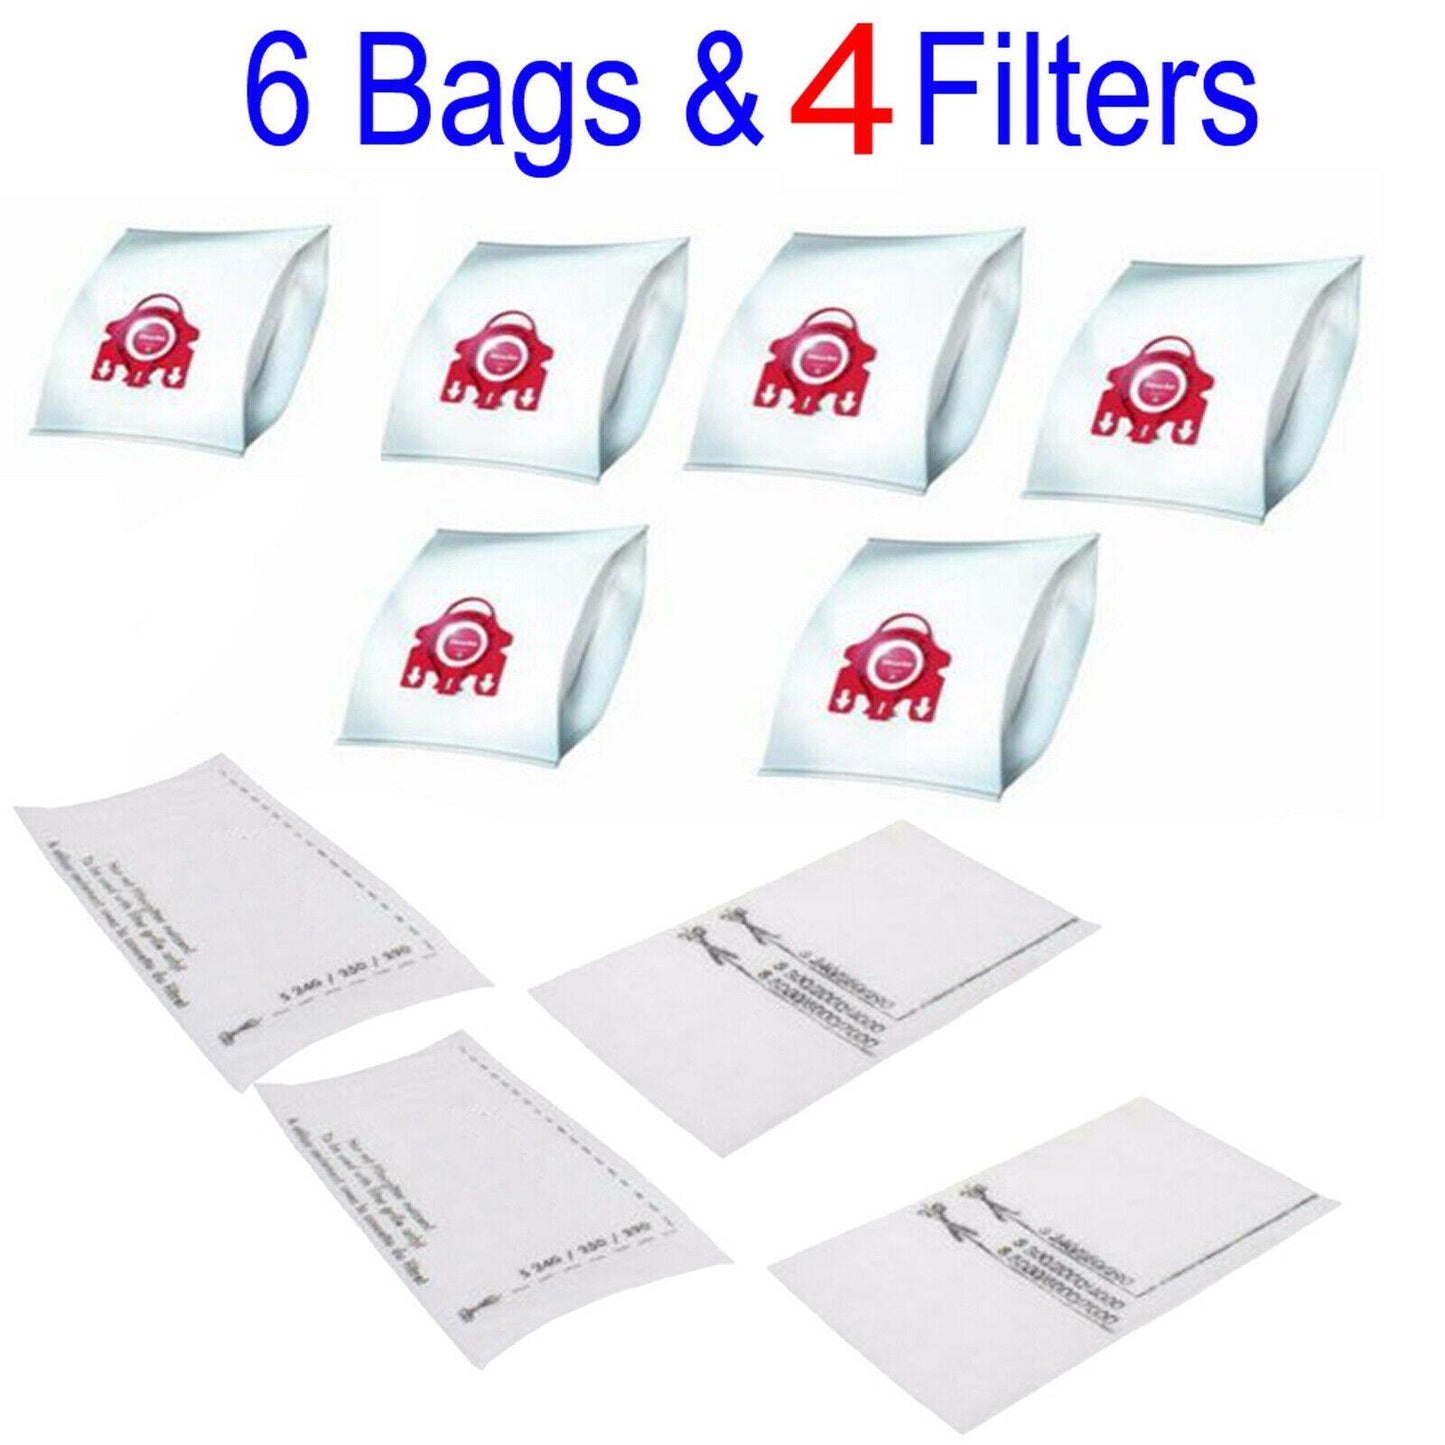 6X Vacuum Cleaner Bags For Miele FJM S710-1 S711-1 S712-1 S714 S714-1 Sparesbarn